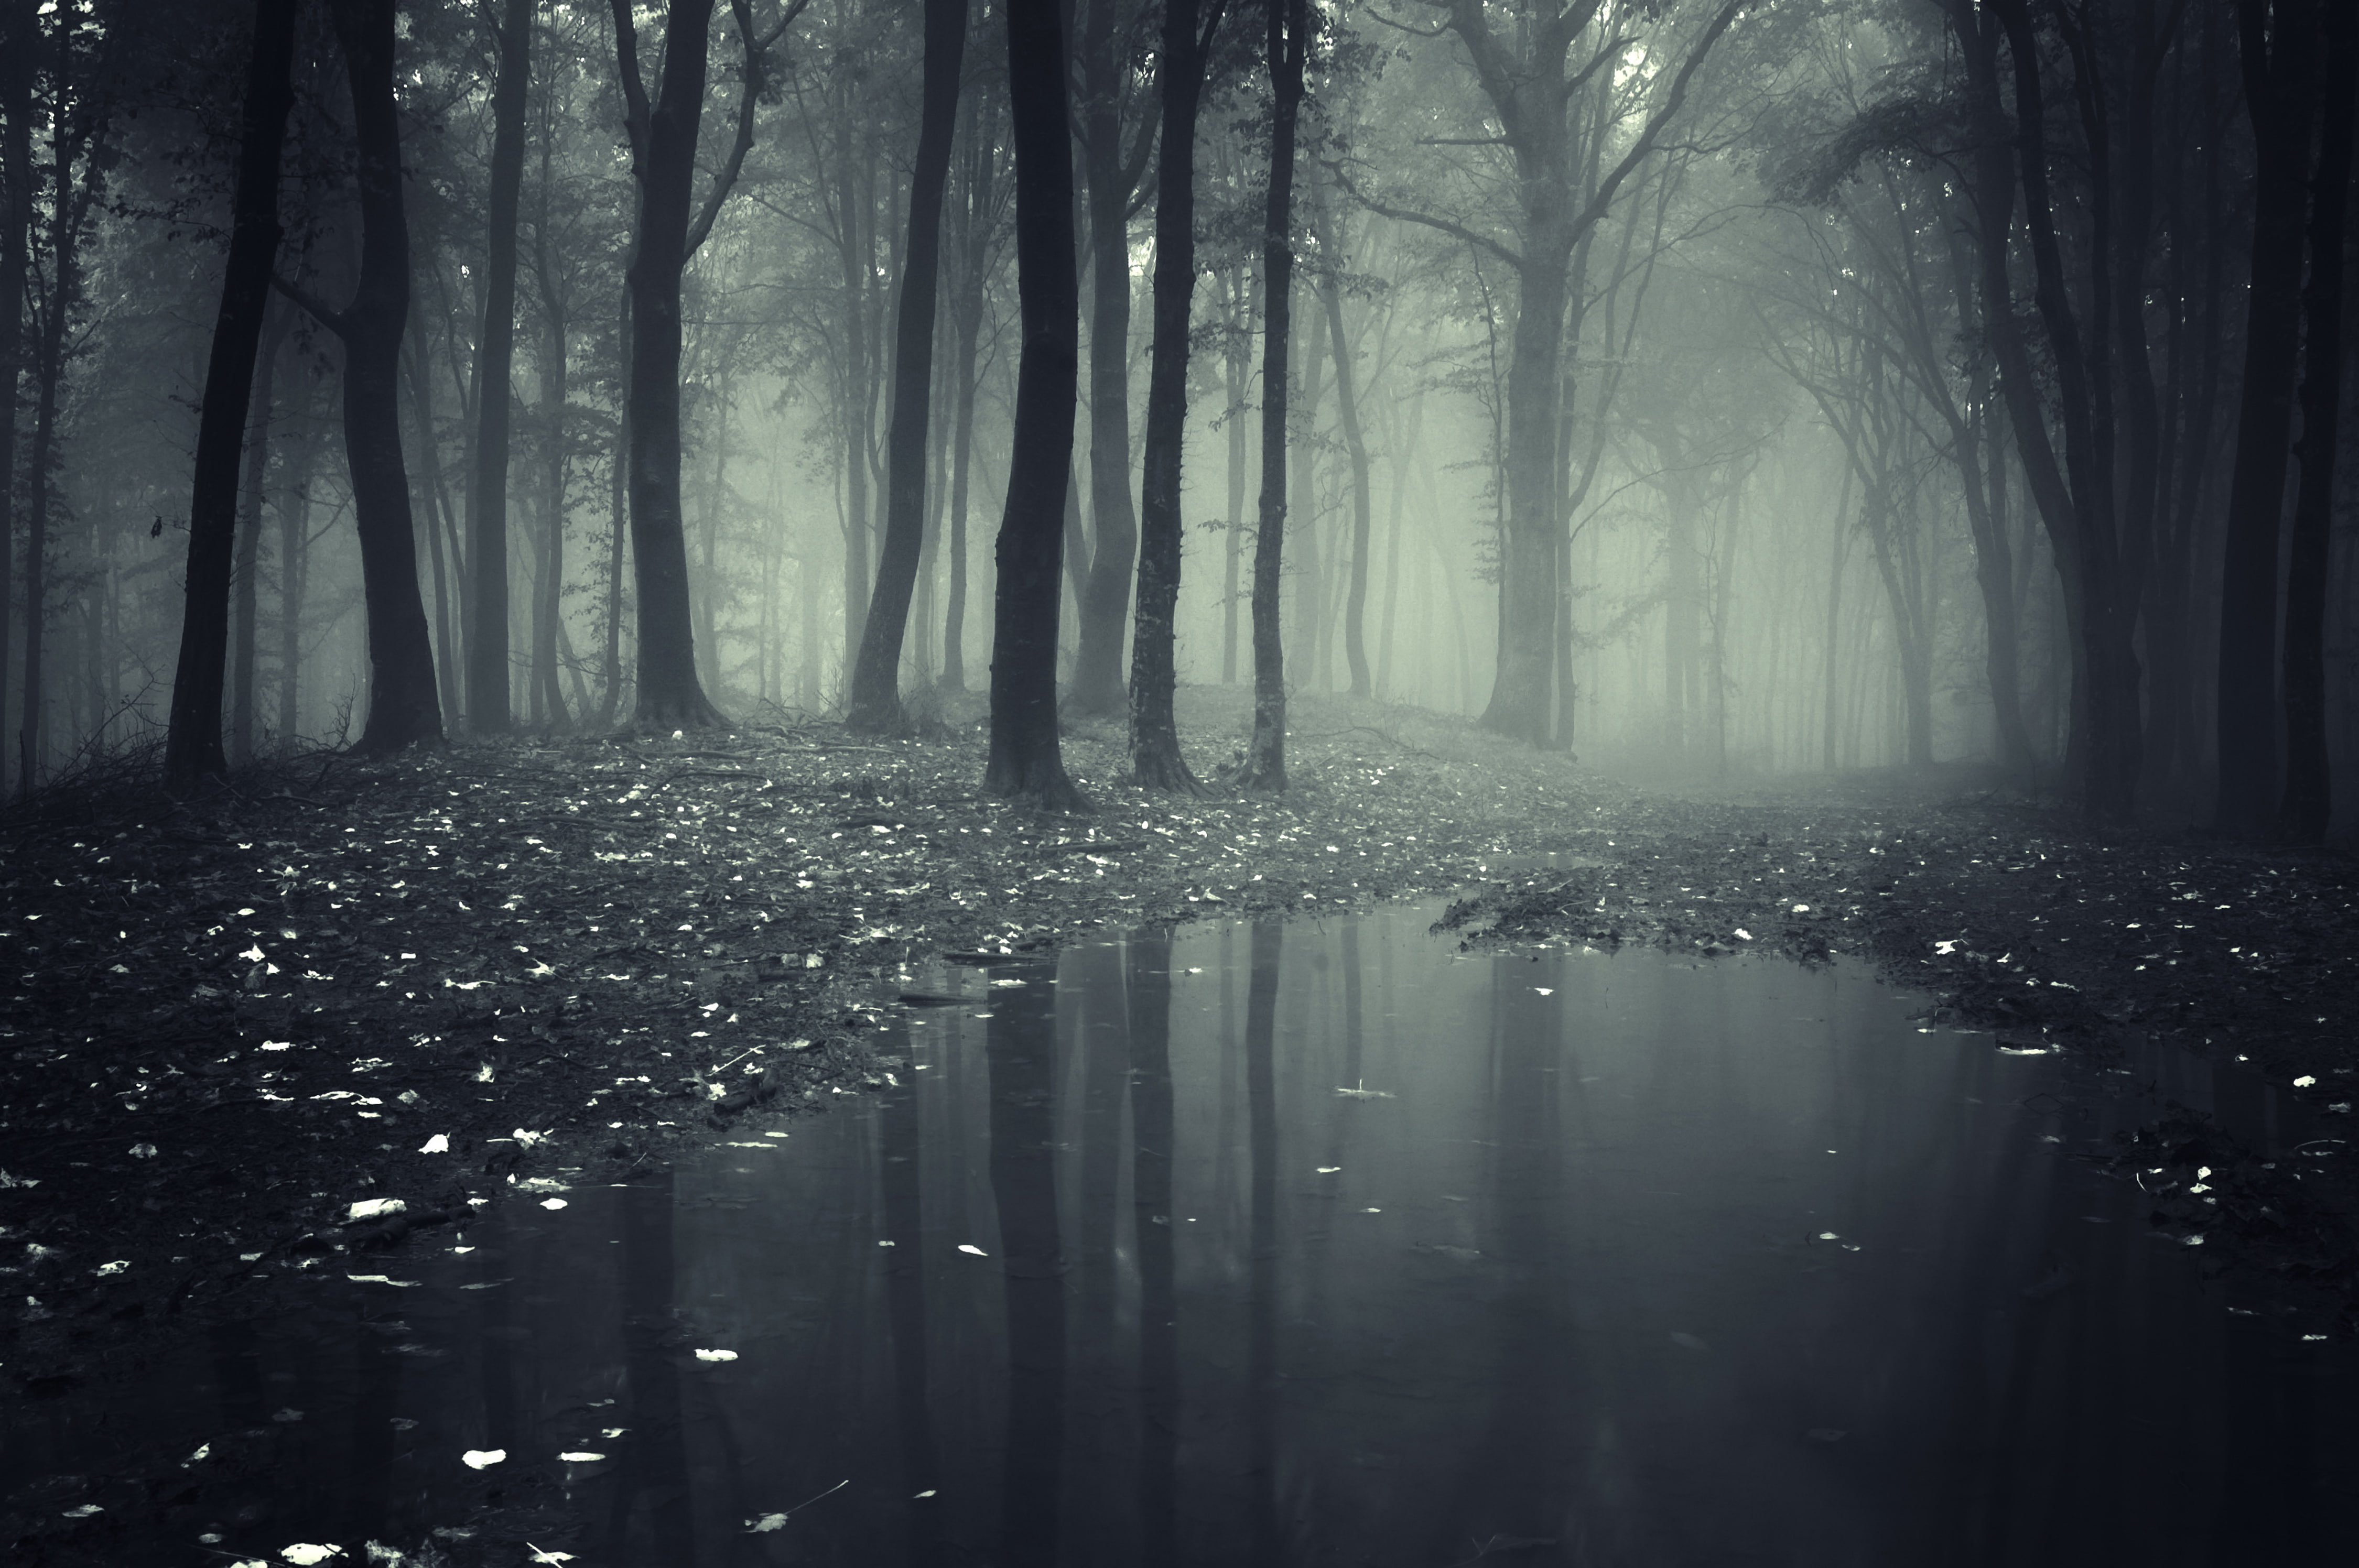 fog, forests, nature, puddle